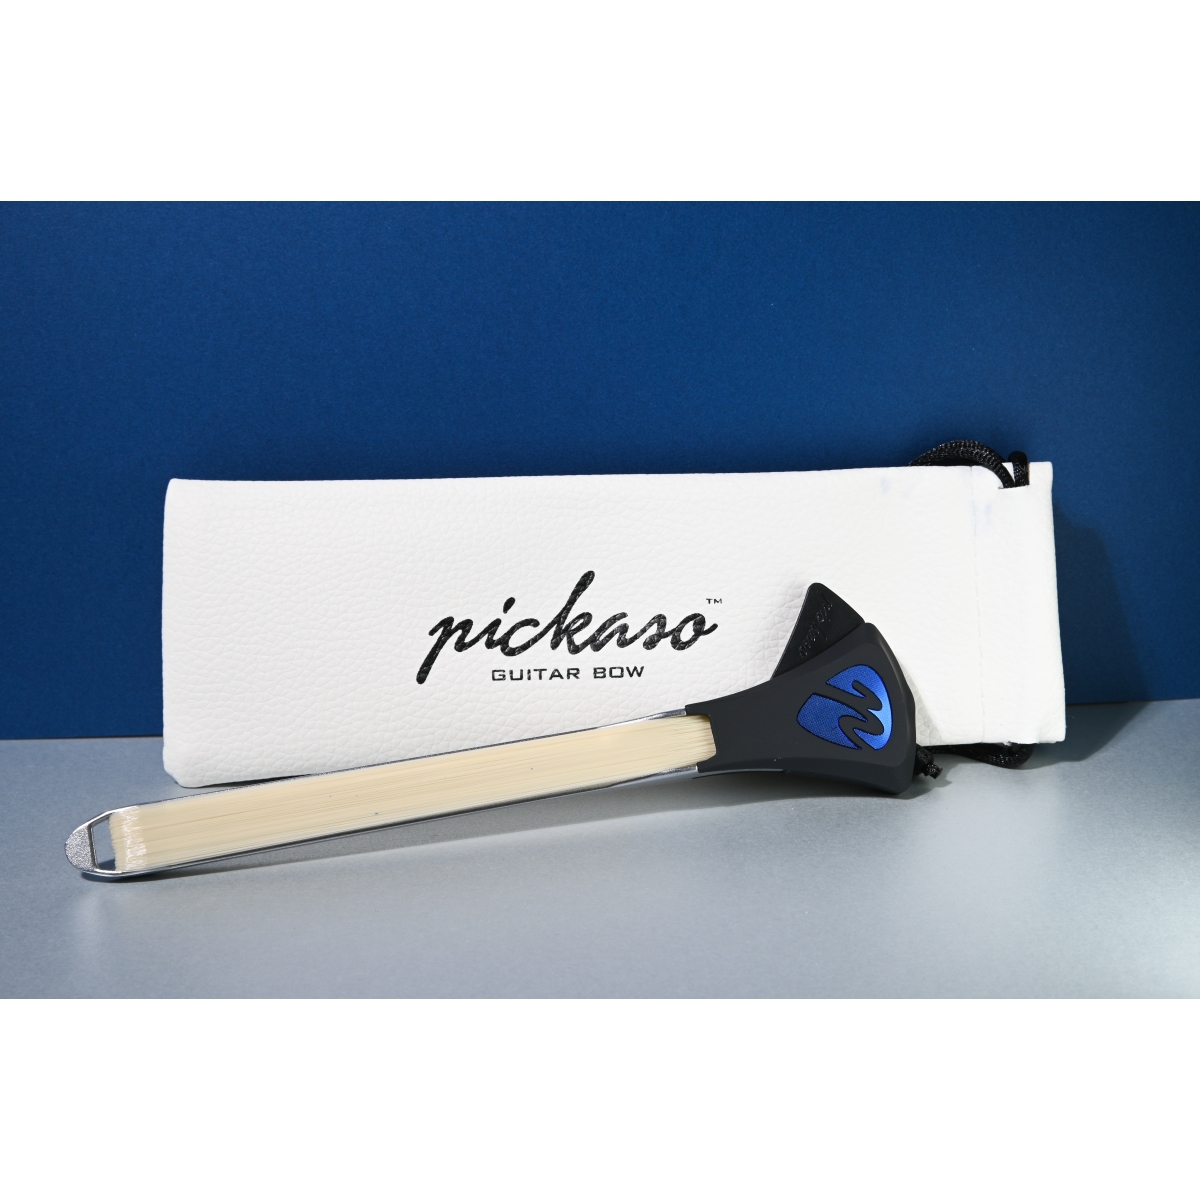 Pickaso Guitar bow, The Sound of Creativity 🎸, By Pickaso Guitar Bow